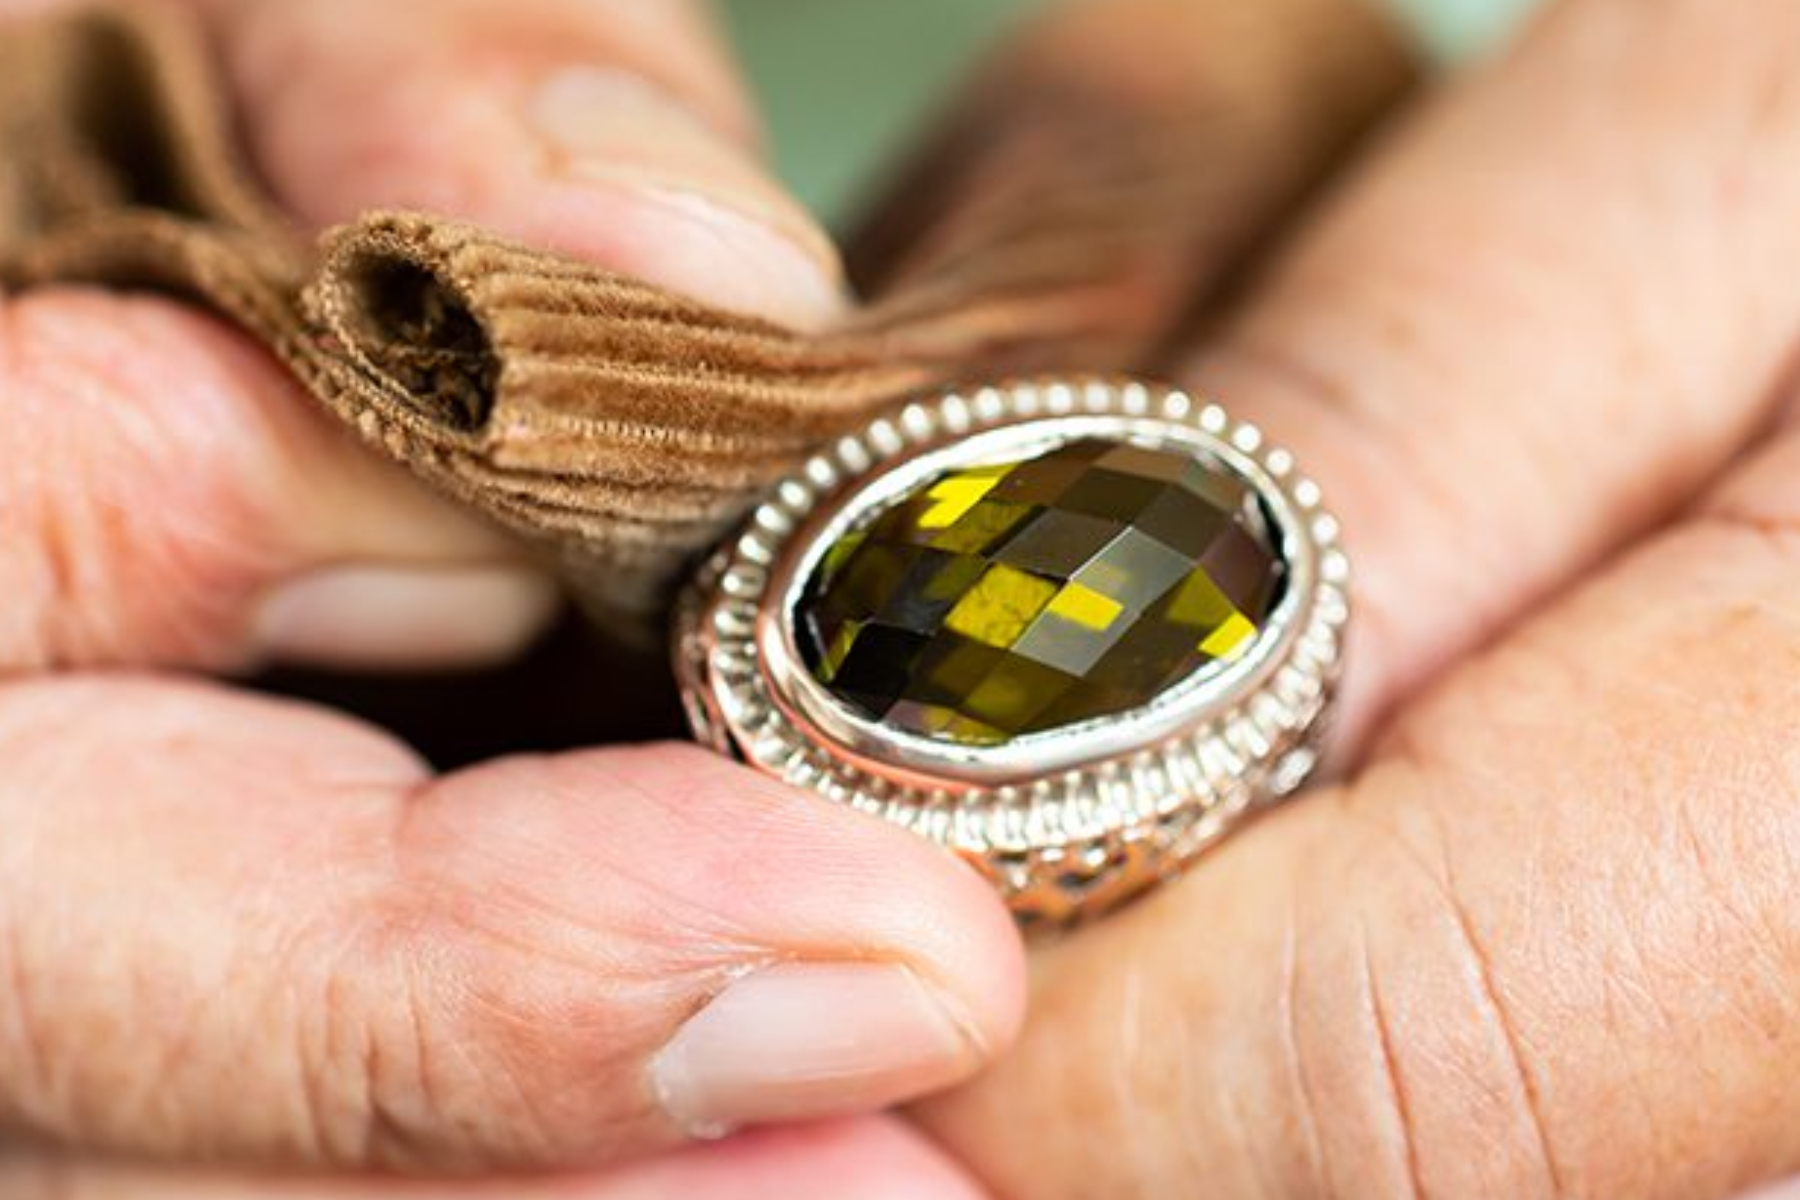 A person's hand polishing a yellow-stoned Victorian-era ring